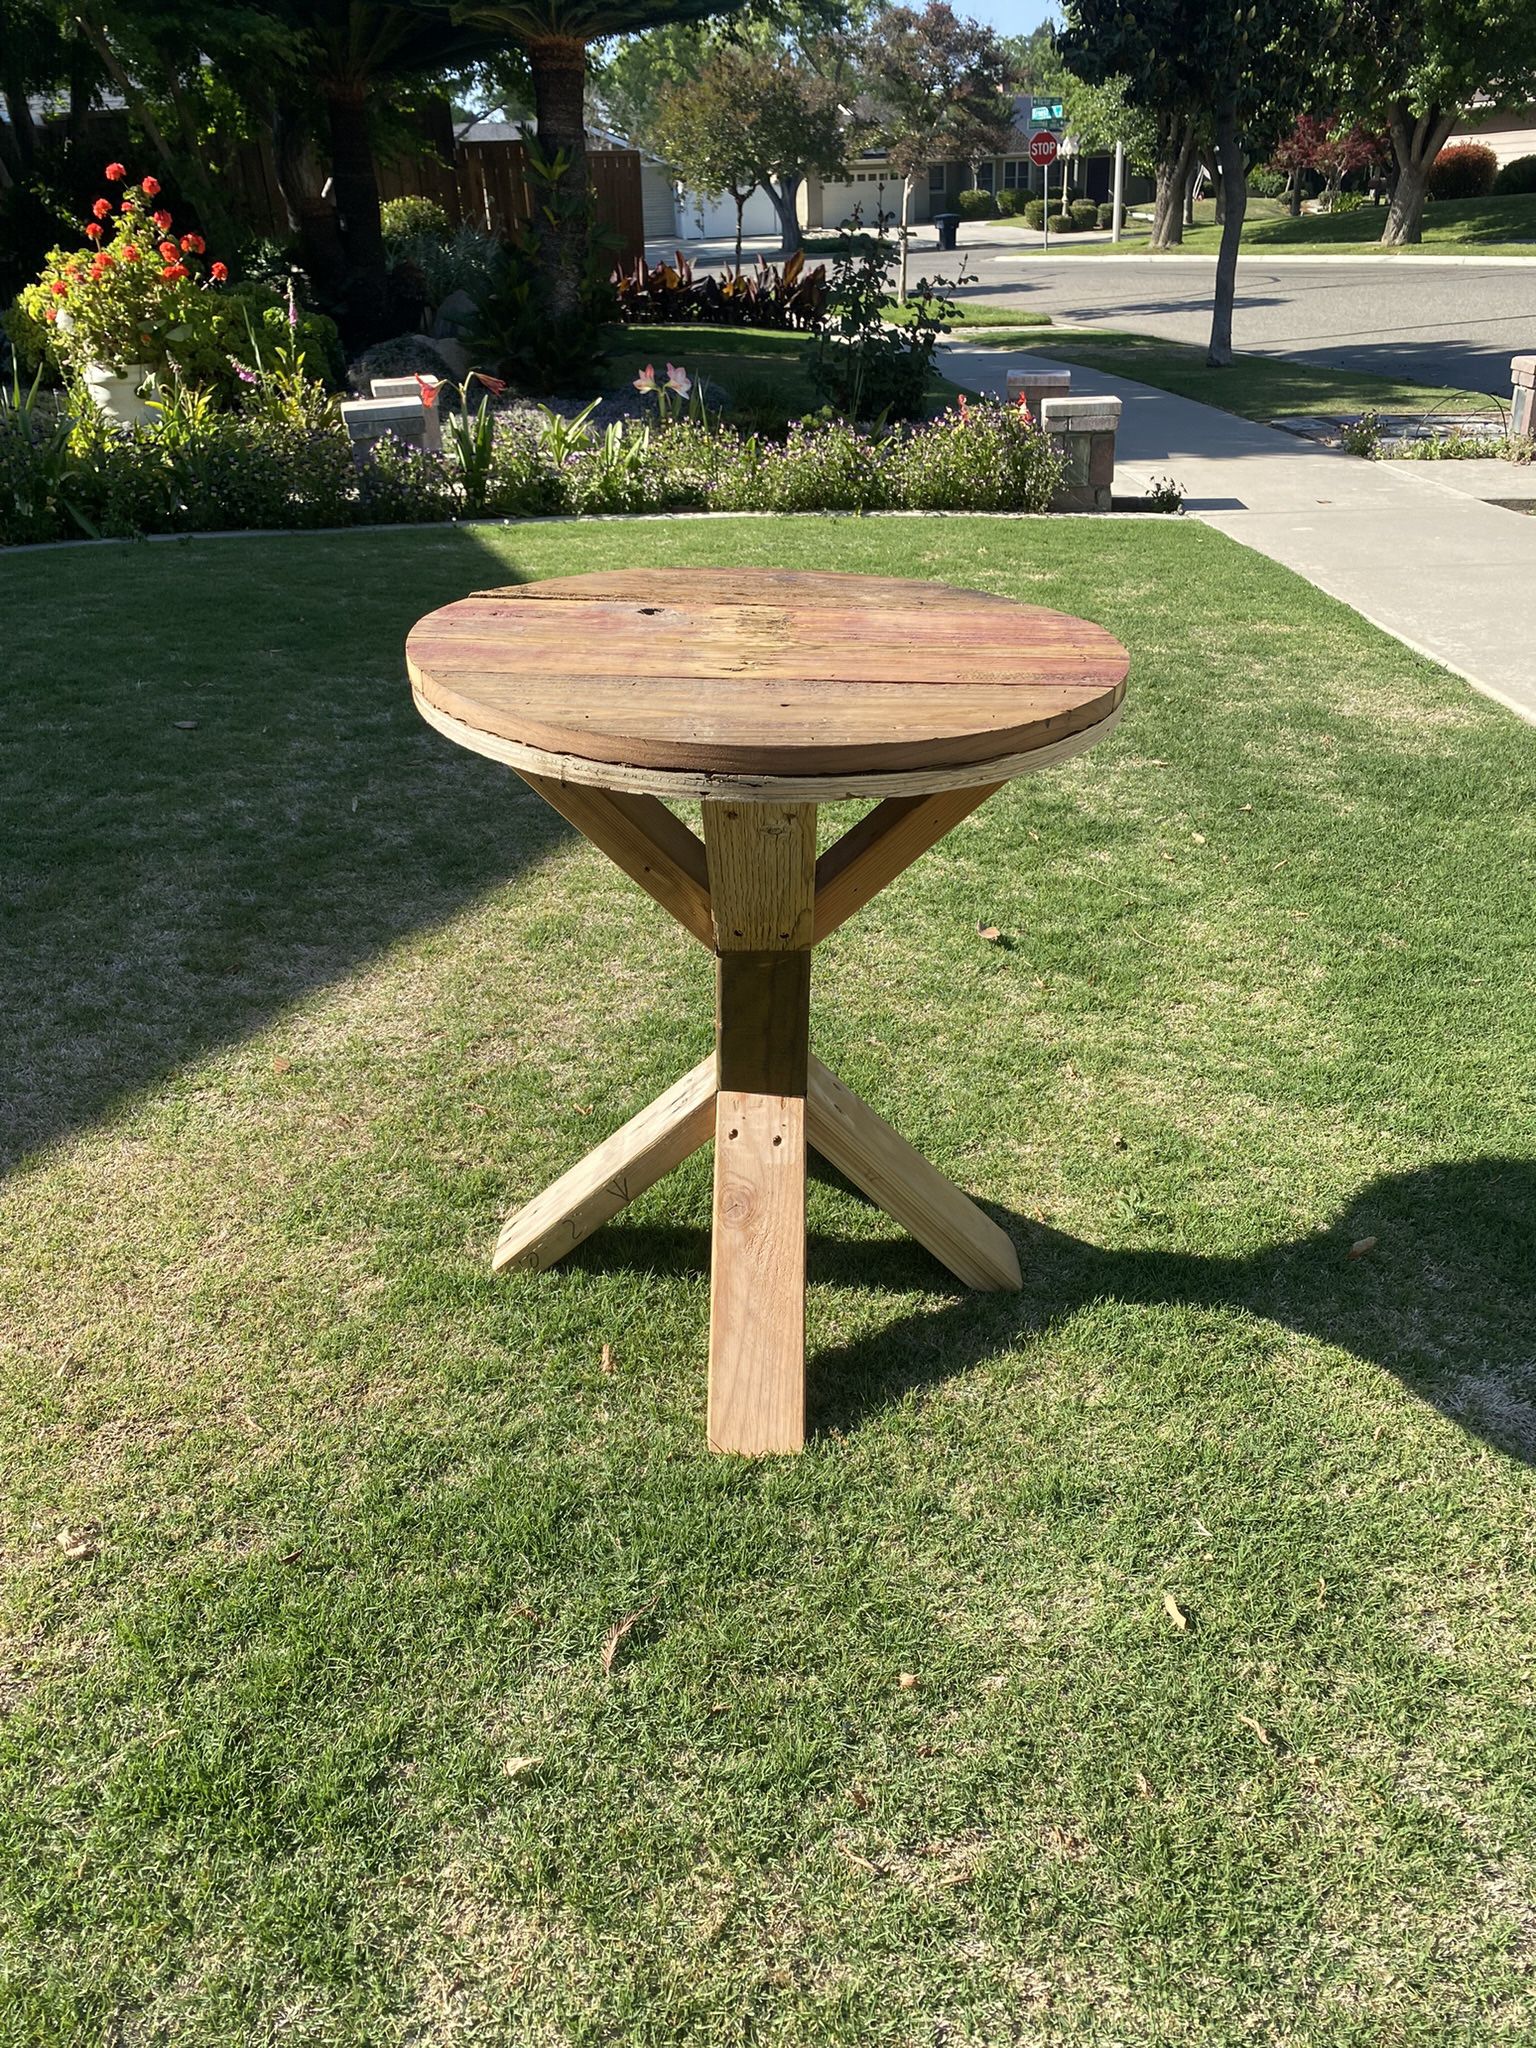 🪵🔶Fence Wood Table Top Table🔸🤎 